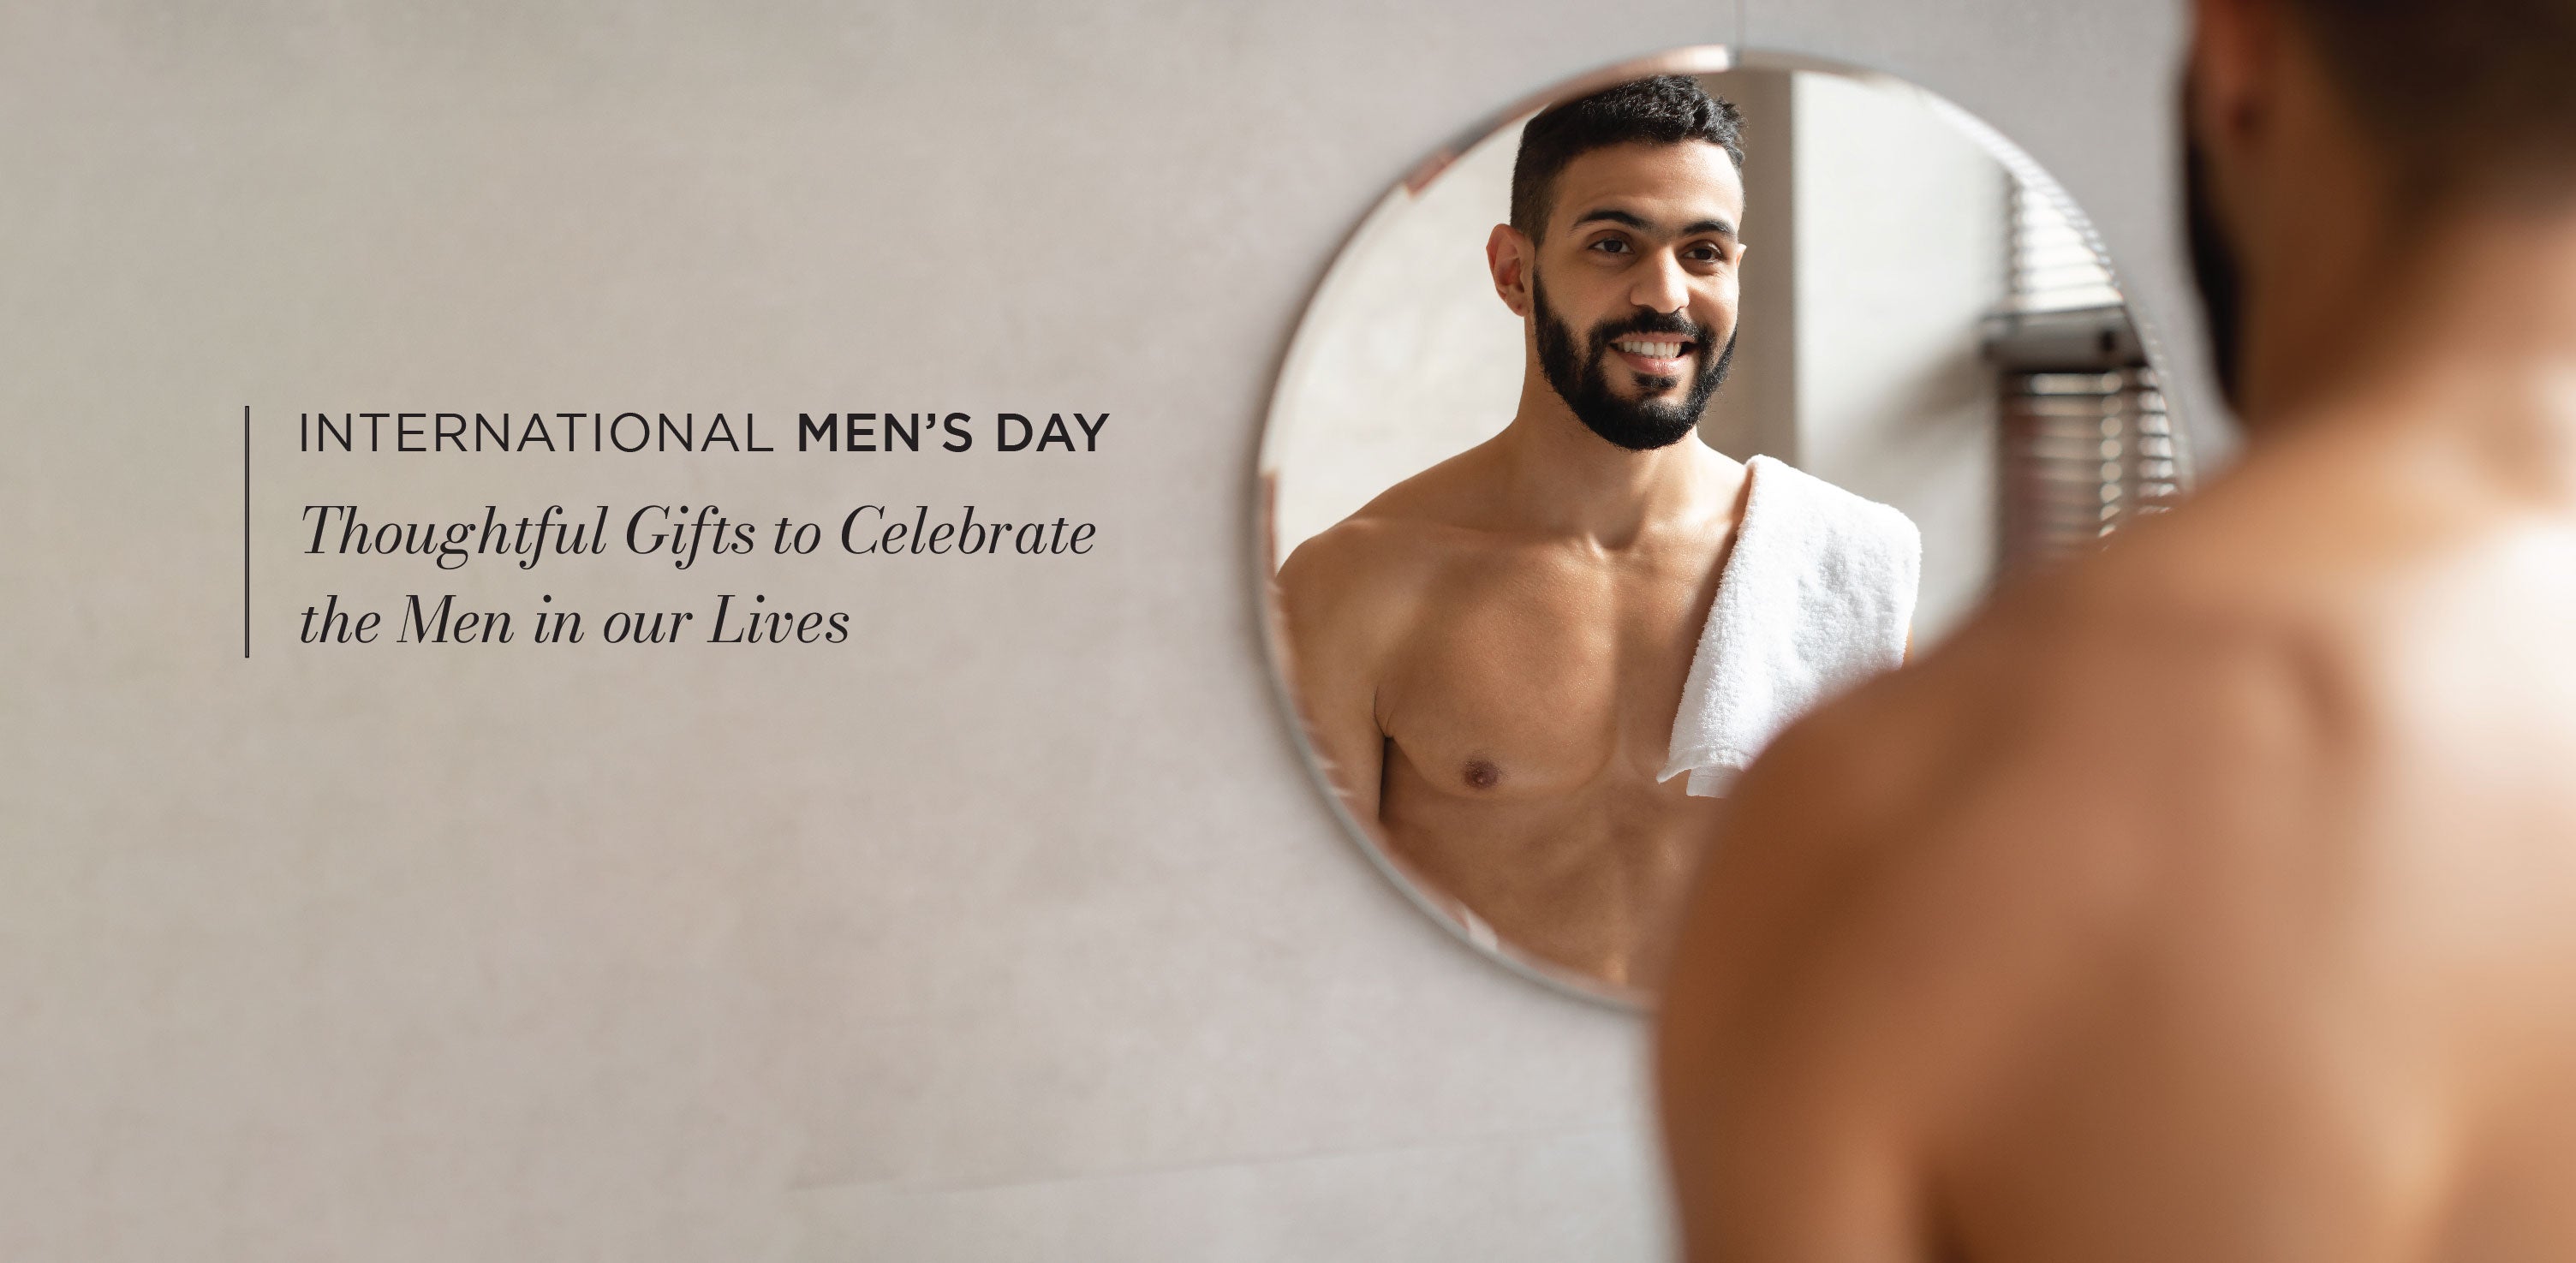 International Men's Day 2022: Thoughtful Gifts to Celebrate the Men in our Lives